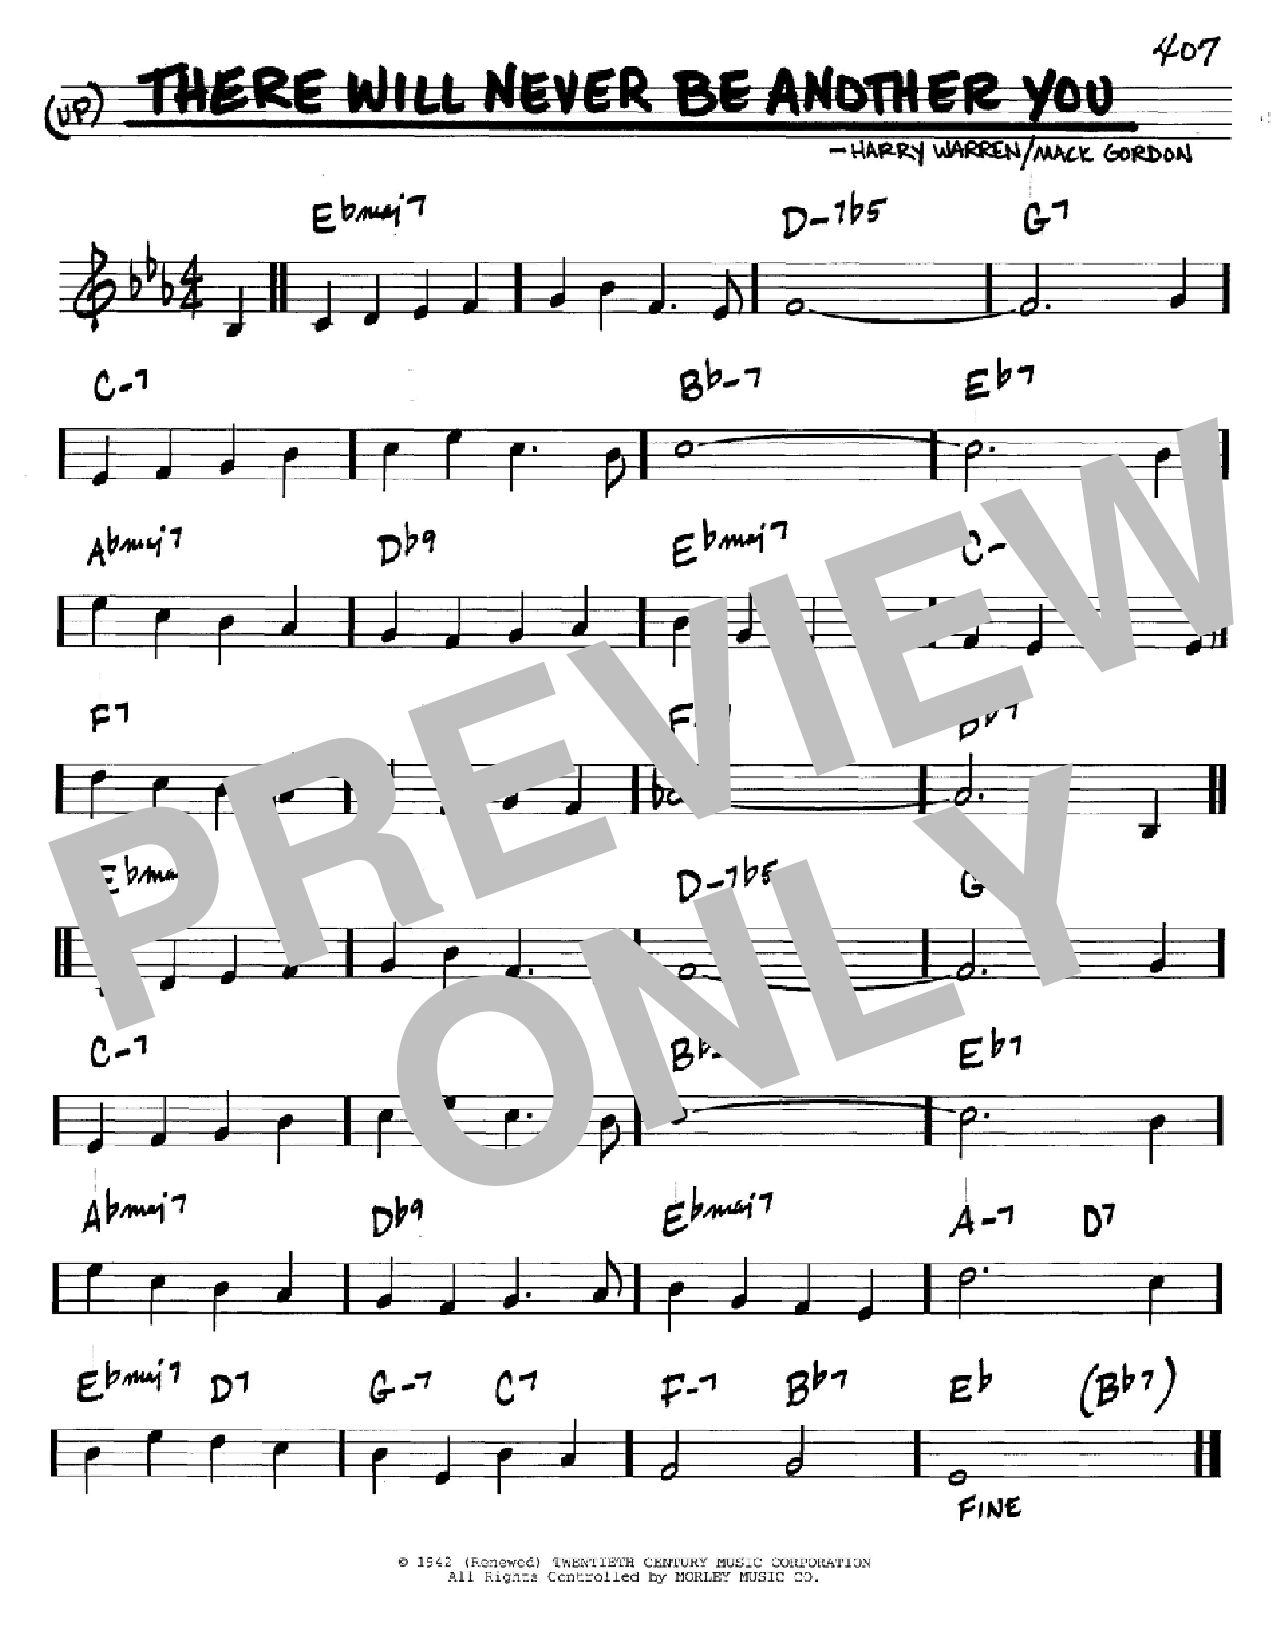 Download Mack Gordon There Will Never Be Another You Sheet Music